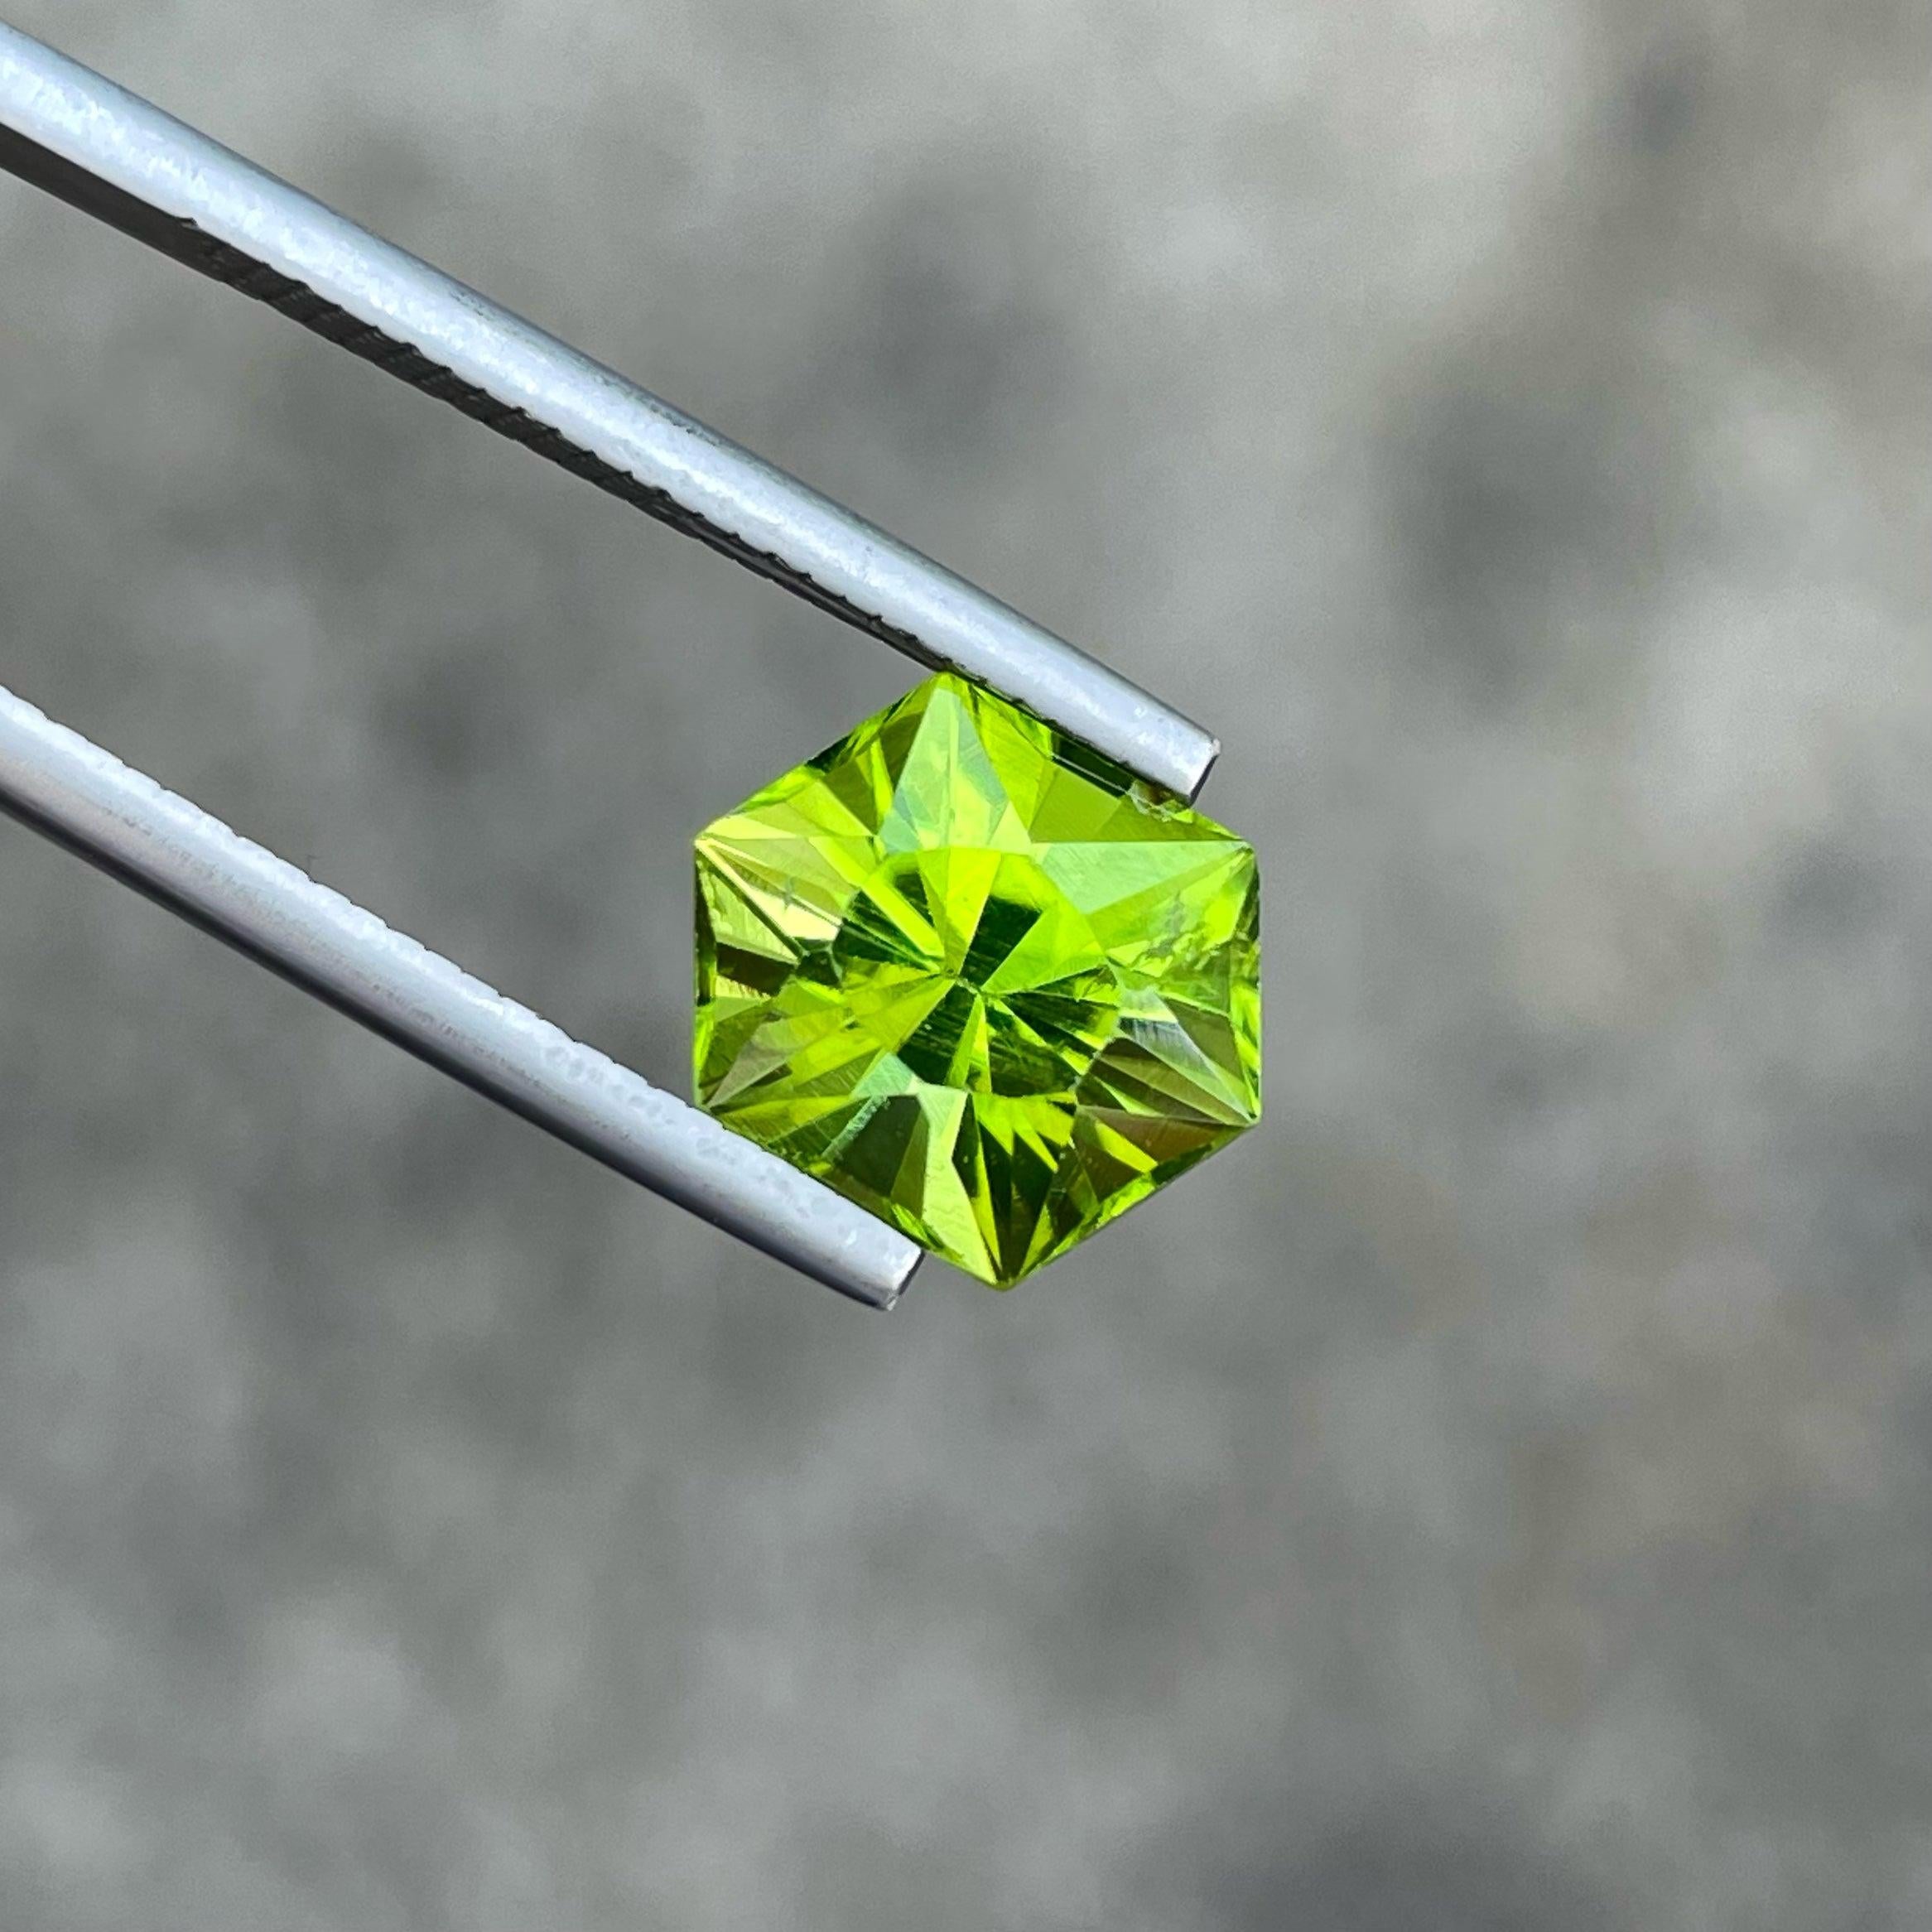 Outstanding Natural Green Peridot Gemstone, Available for Sale at wholesale price natural high quality 4.85 carats VVS Clarity loose Peridot from Pakistan.

Product Information:
GEMSTONE TYPE:	Outstanding Natural Green Peridot Gemstone
WEIGHT:	4.85